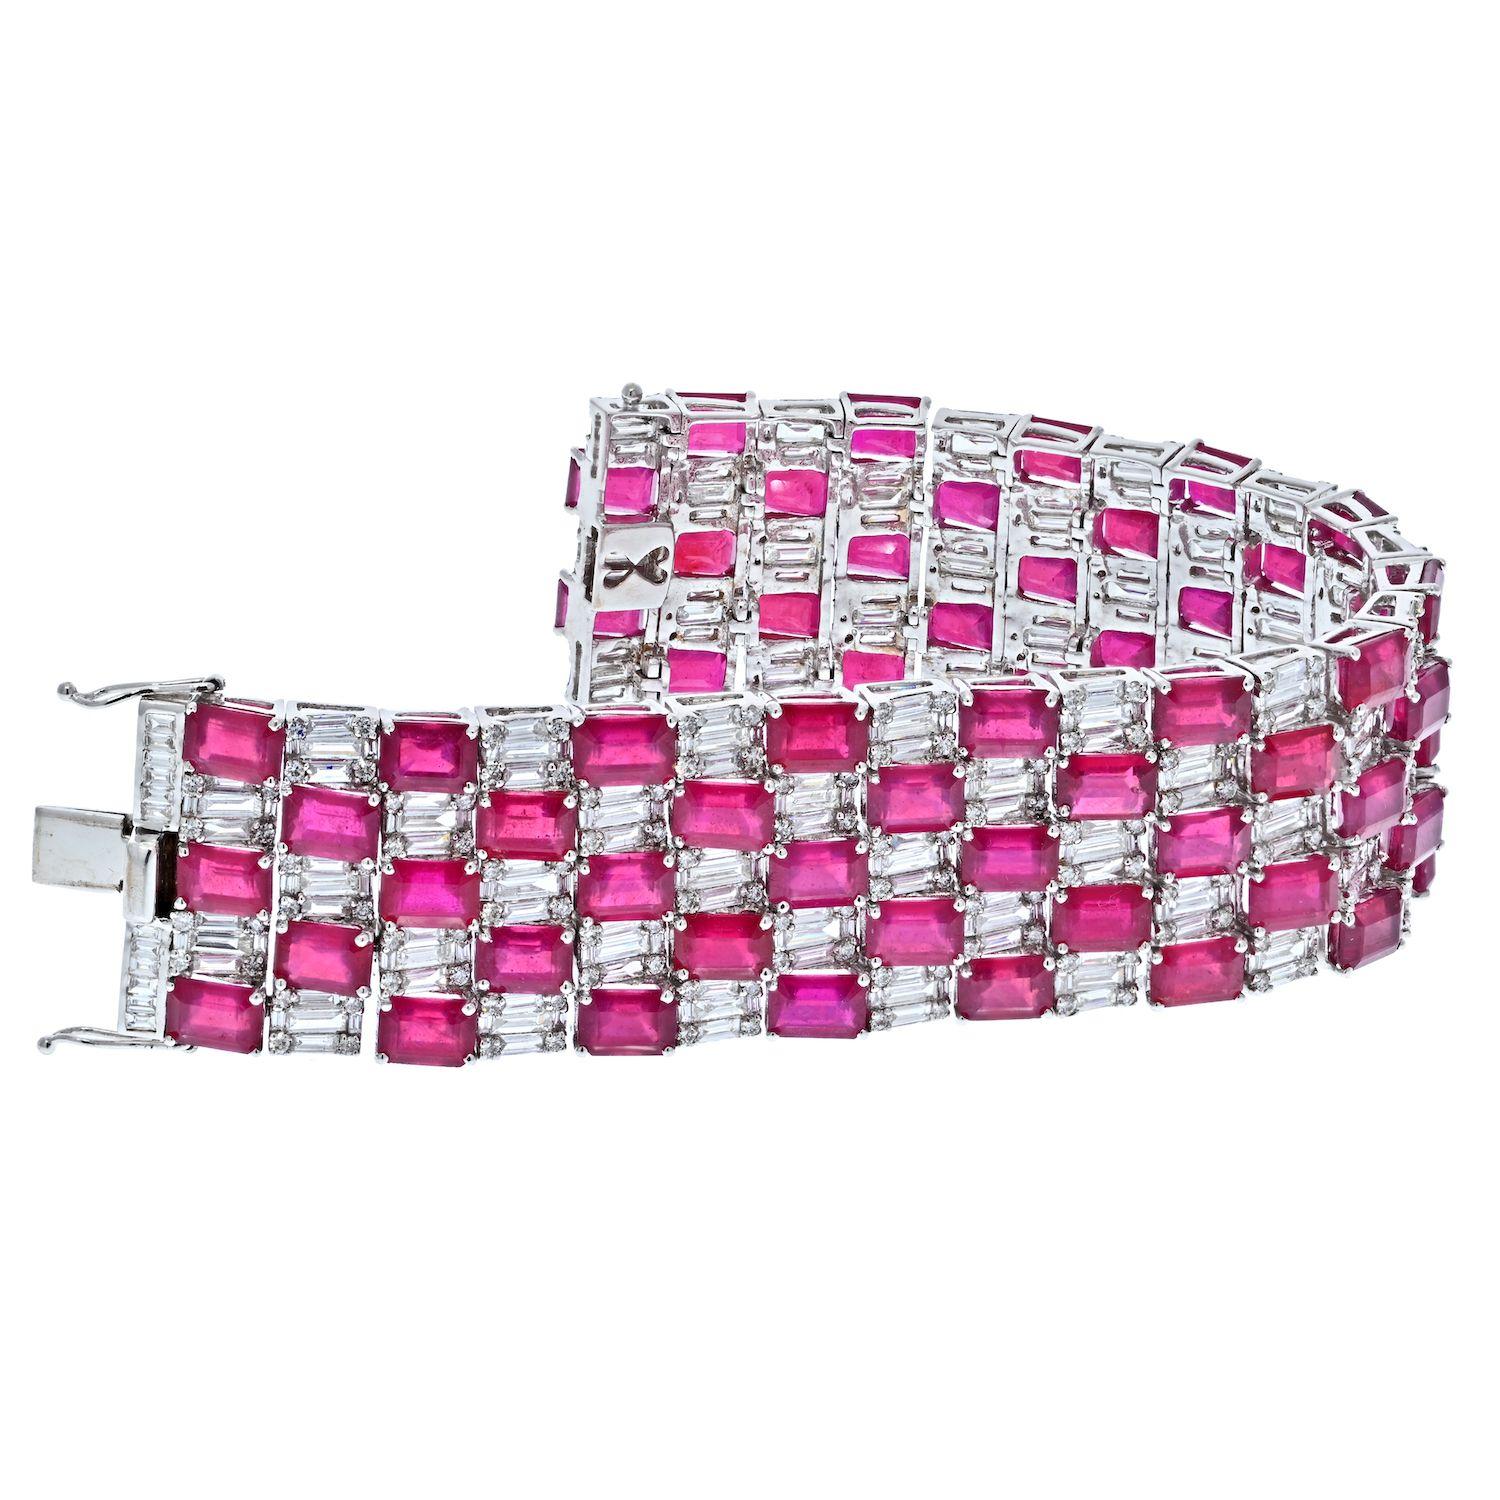 18k White Gold Diamond and Ruby Estate Carpet Style Bracelet.

This is an exciting diamond and ruby carpet-style bracelet from our estate collection. We can see it being worn by women as well as men who love to own something flashy!

Enjoy the